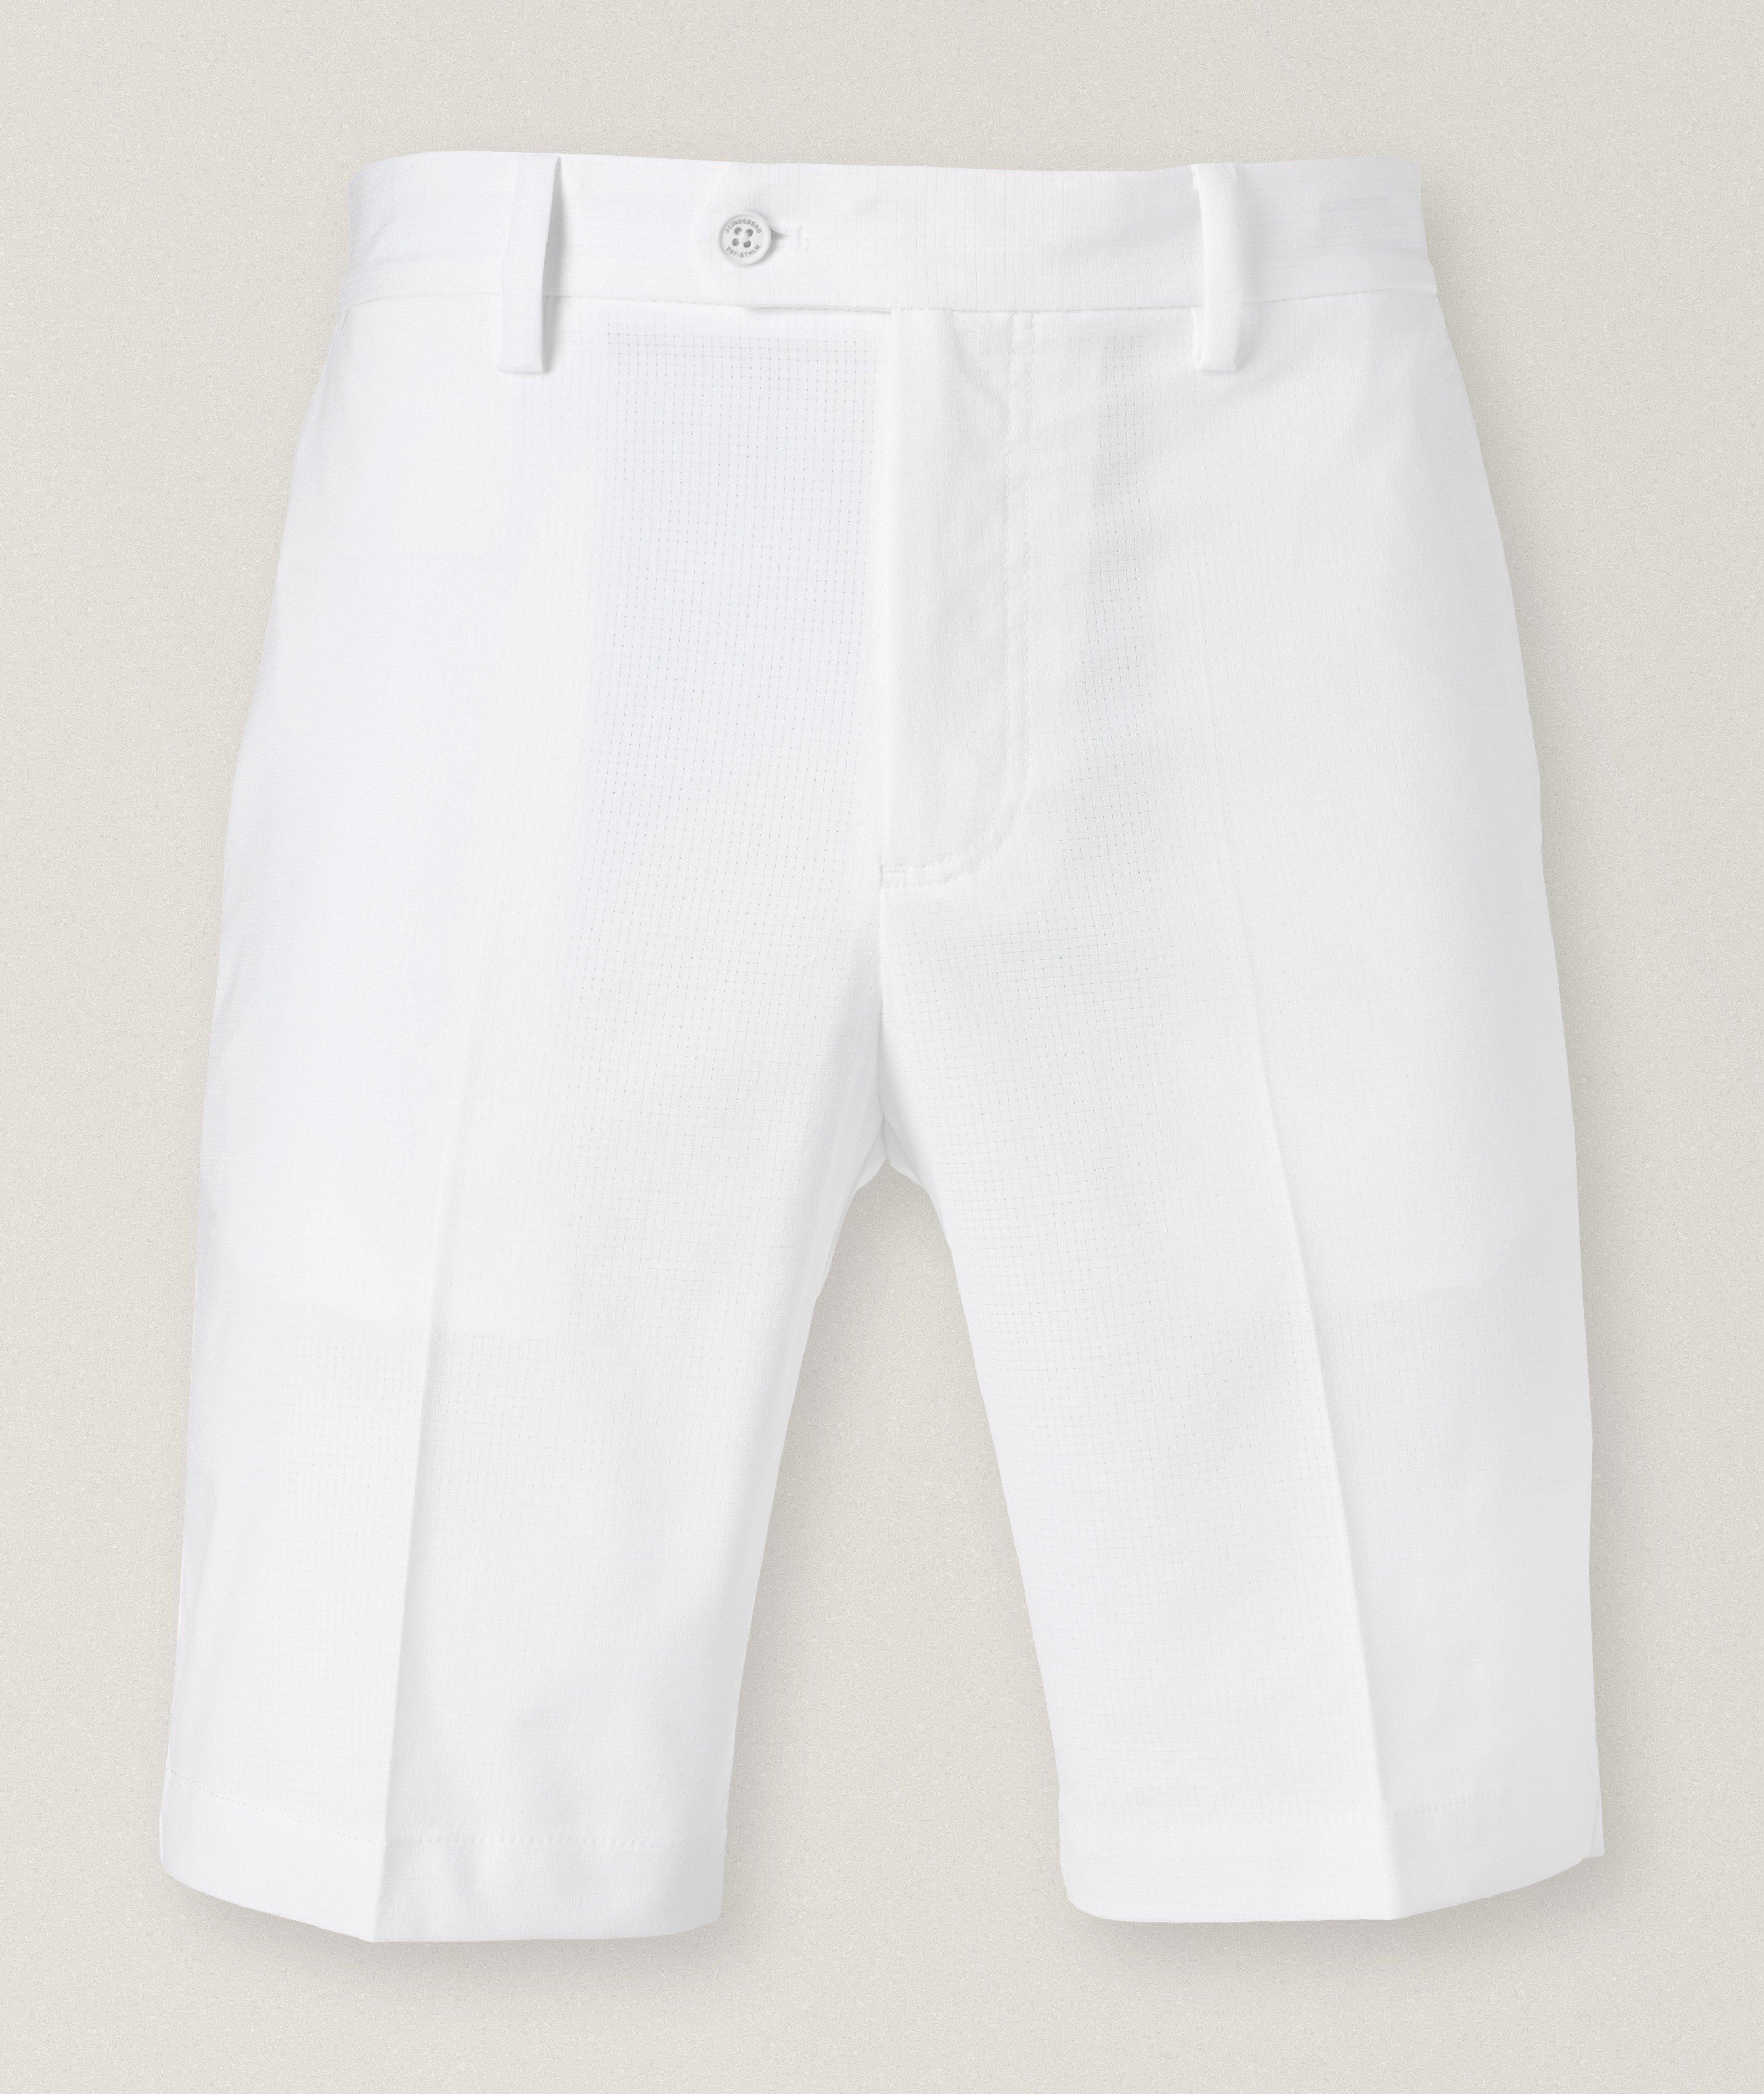 Vent Tight Stretch-Fabric Golf Shorts  image 0